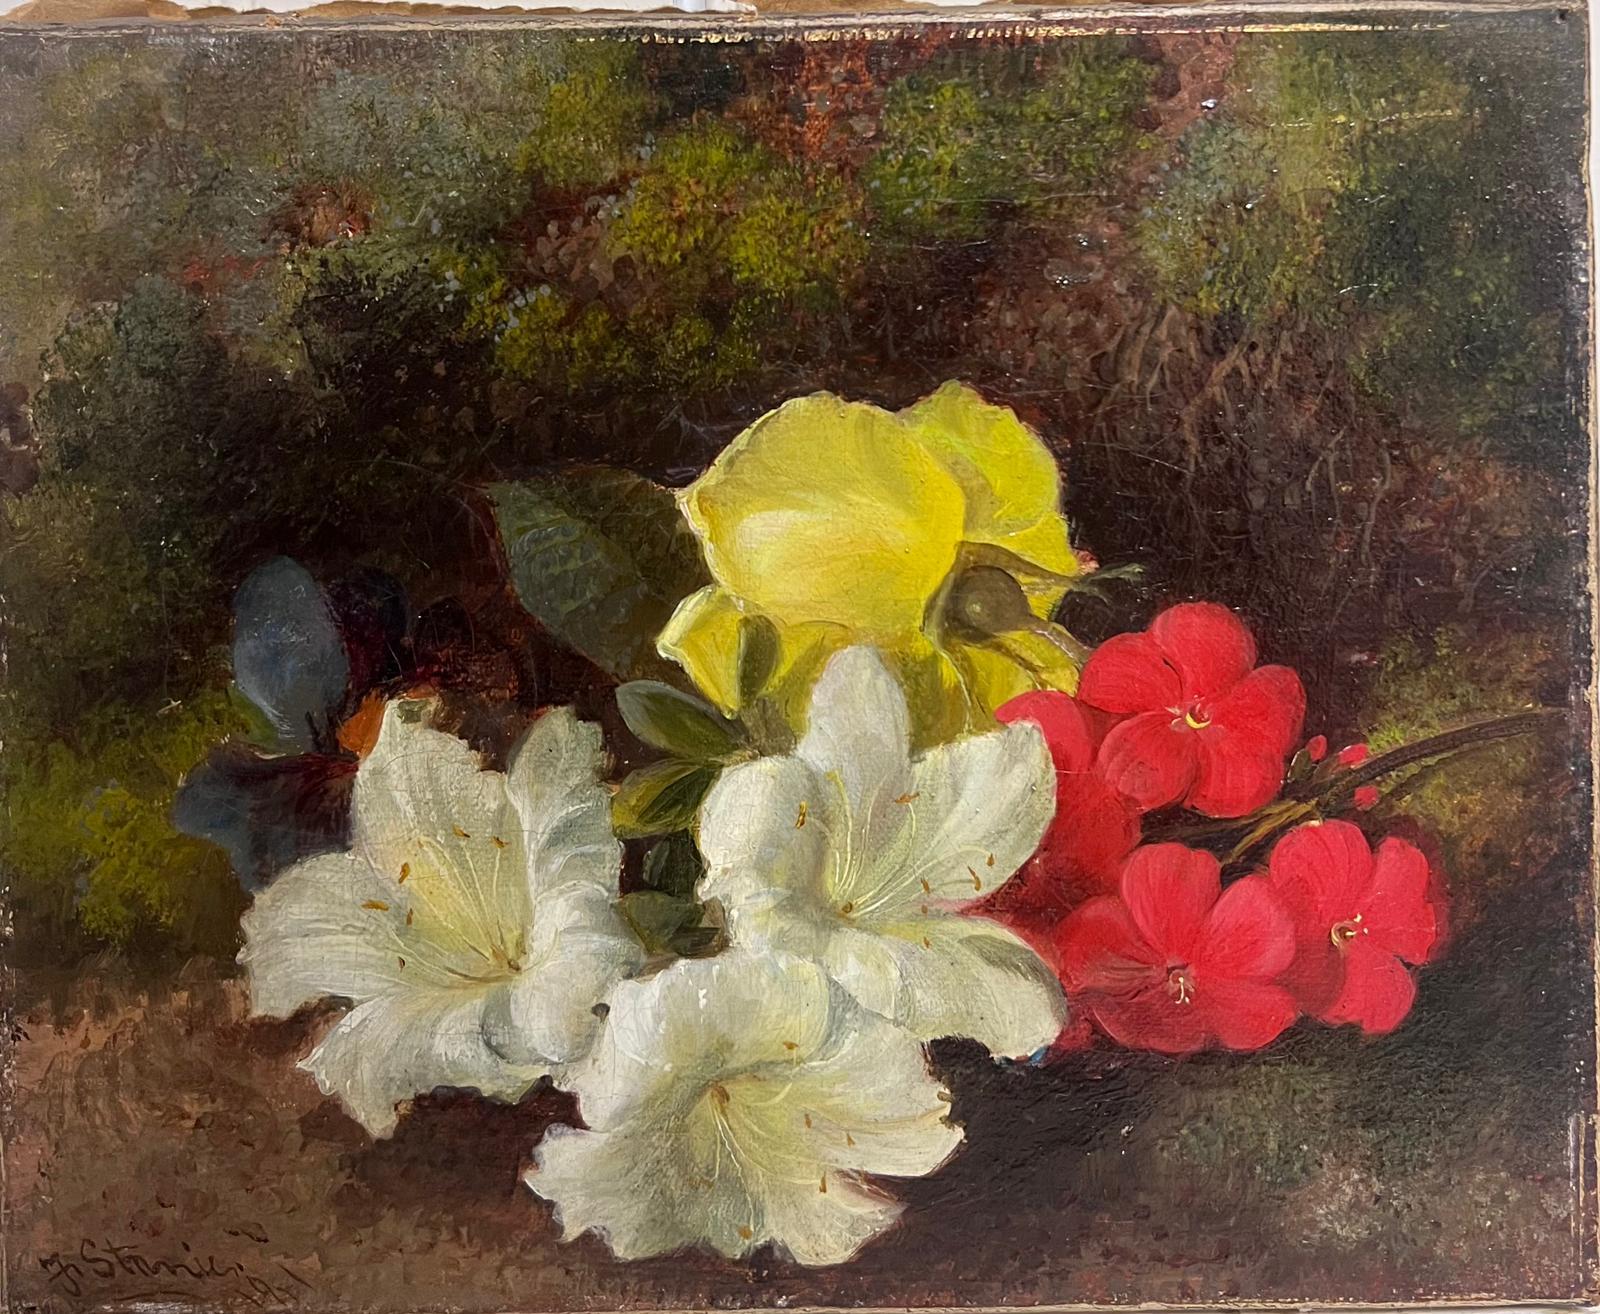 Charming Victorian English Still Life Oil Painting Flowers in Natural Setting For Sale 3